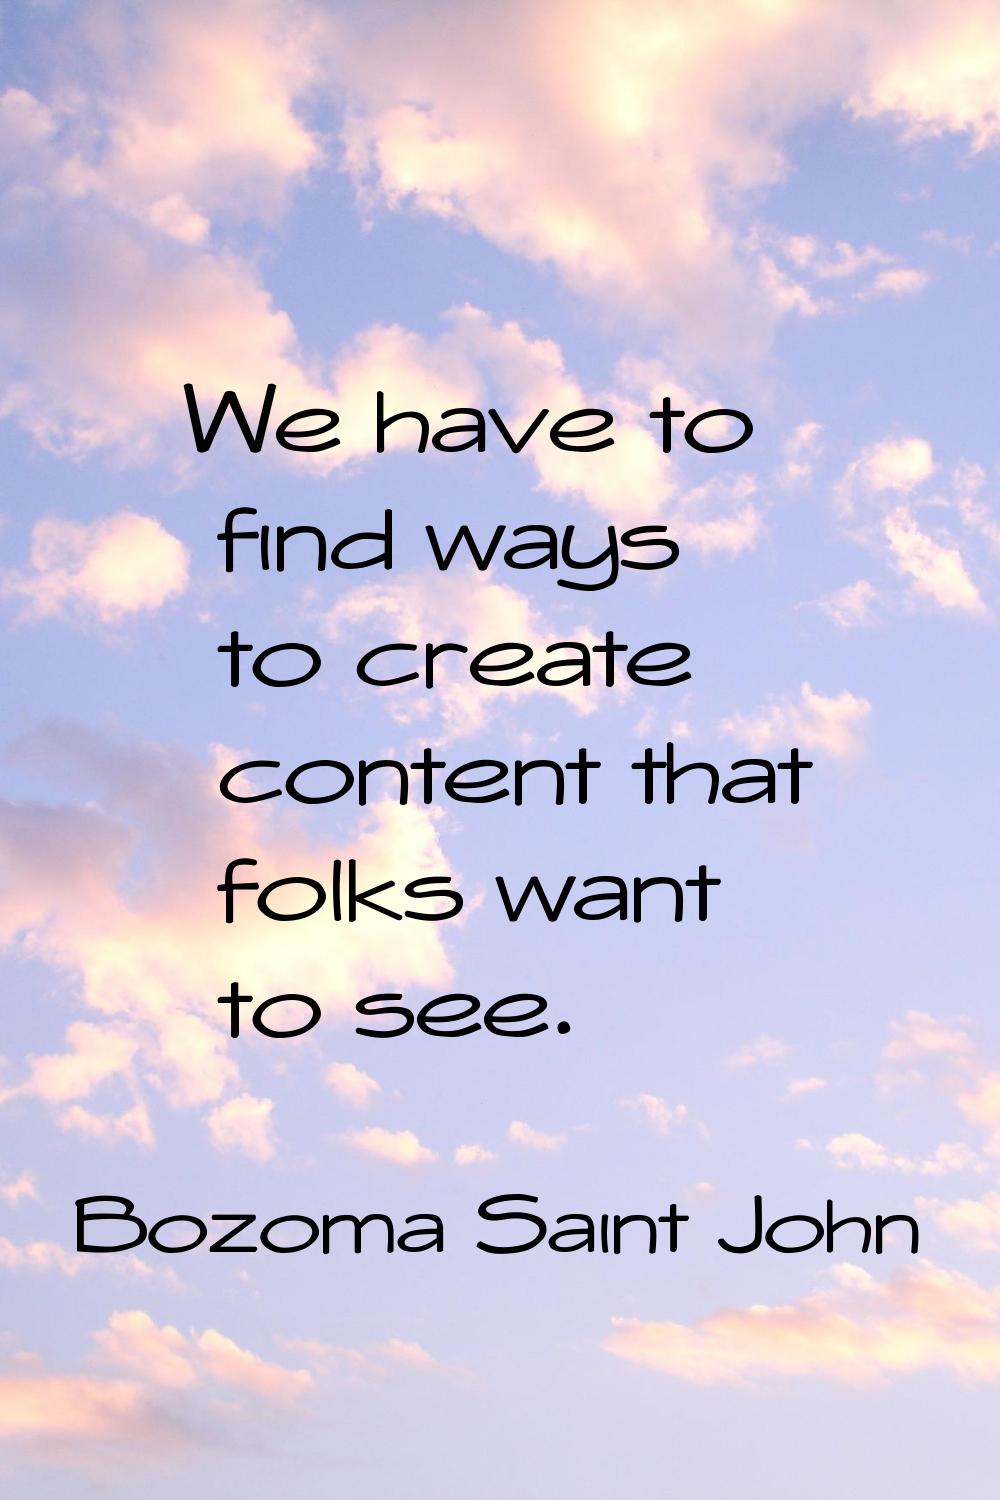 We have to find ways to create content that folks want to see.